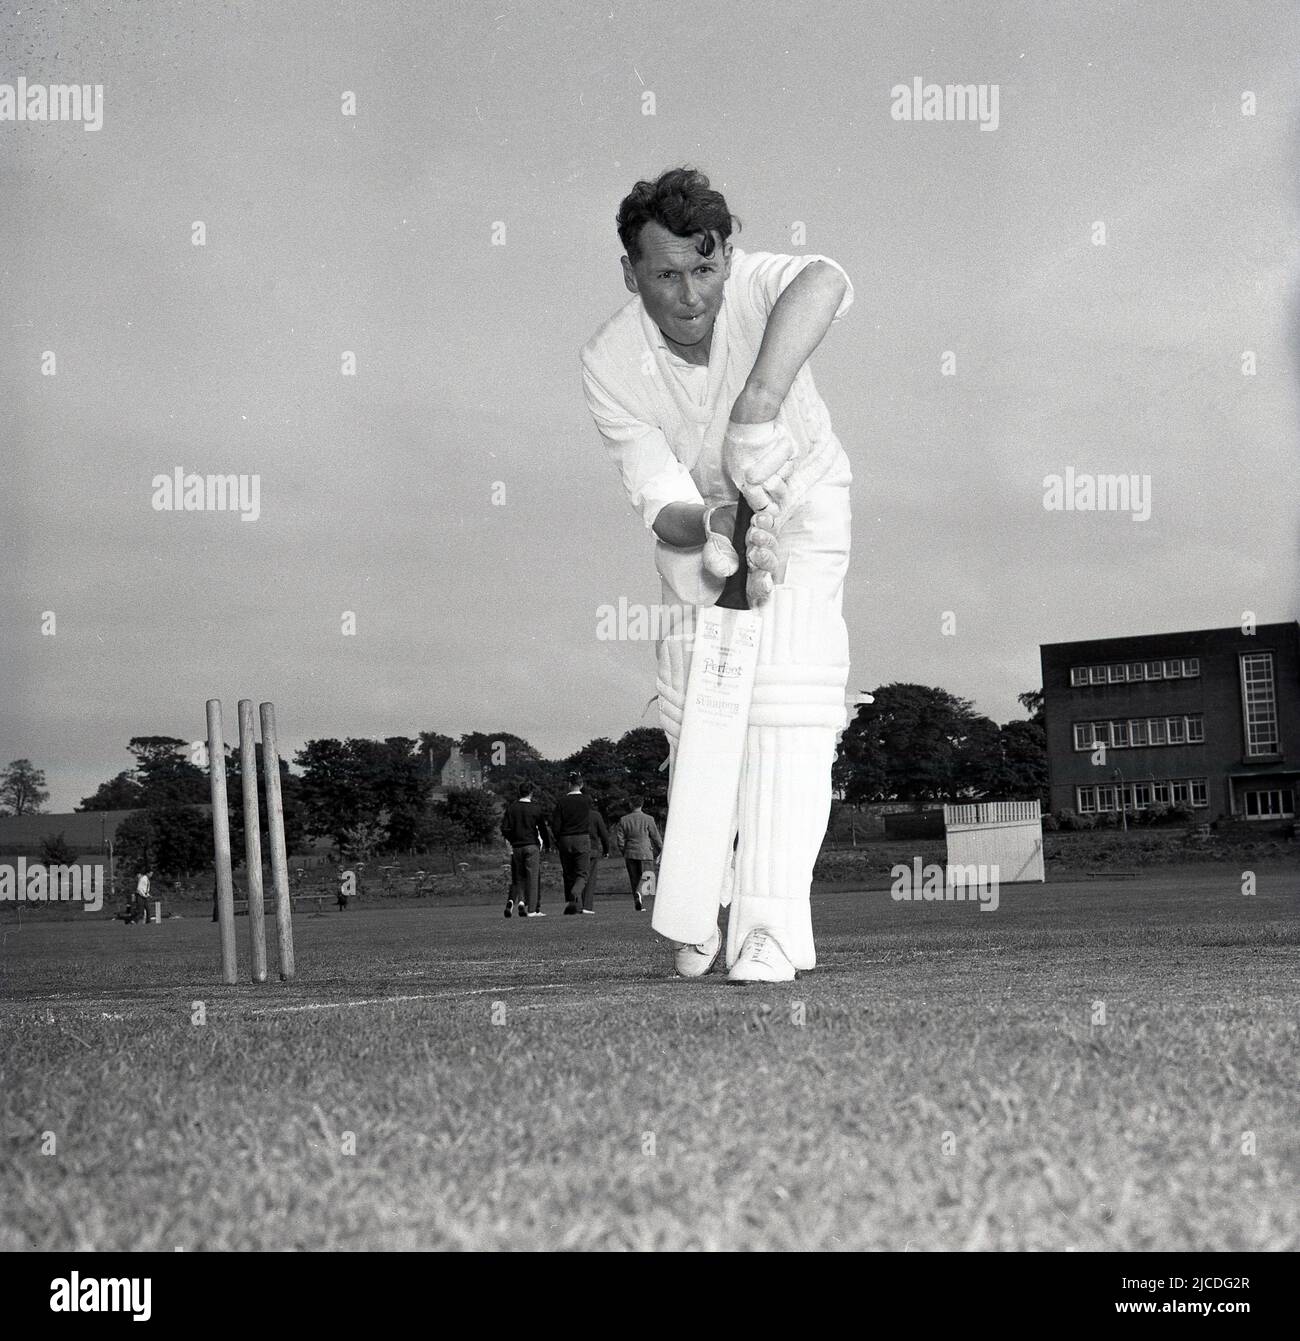 1960s, historical, an amateur cricketer at the crease in front of his wickets demonstrating a forward press with his bat and pads. Stock Photo